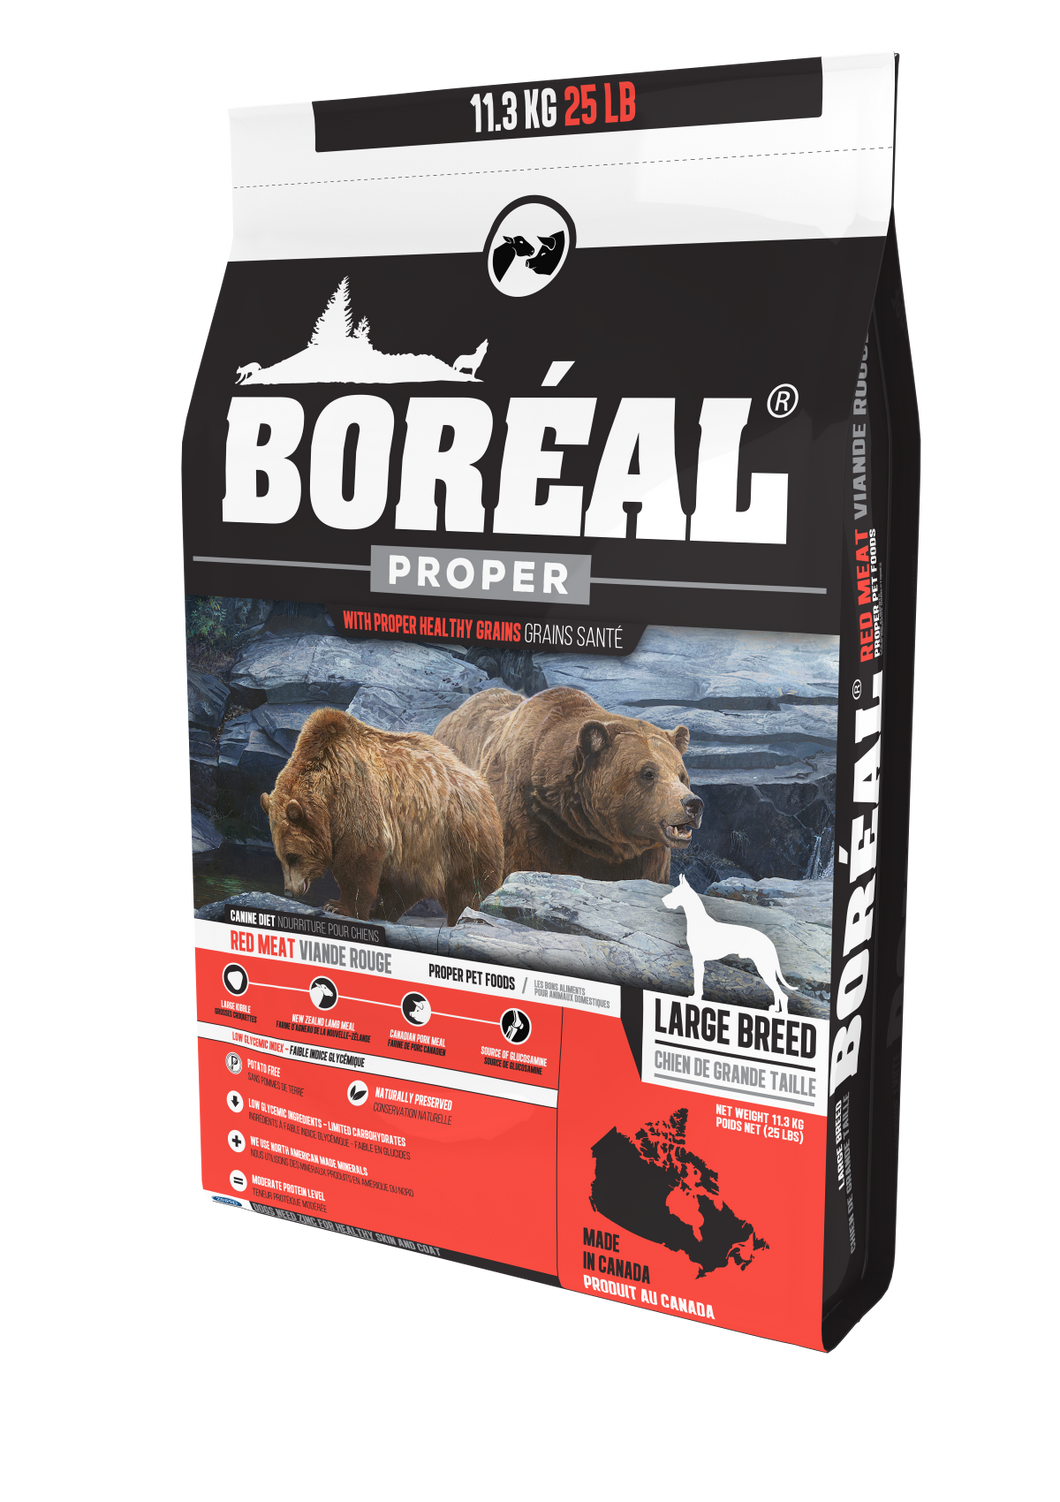 Boréal - Proper Large Breed Red Meat Low Carb Grain Inclusive Dog Food - Low Glycemic - Large Kibble - Canadian Pork Meal - Glucosamine Fortified - North American Minerals - New Zealand Lamb Meal - Potato Free - Made in Canada